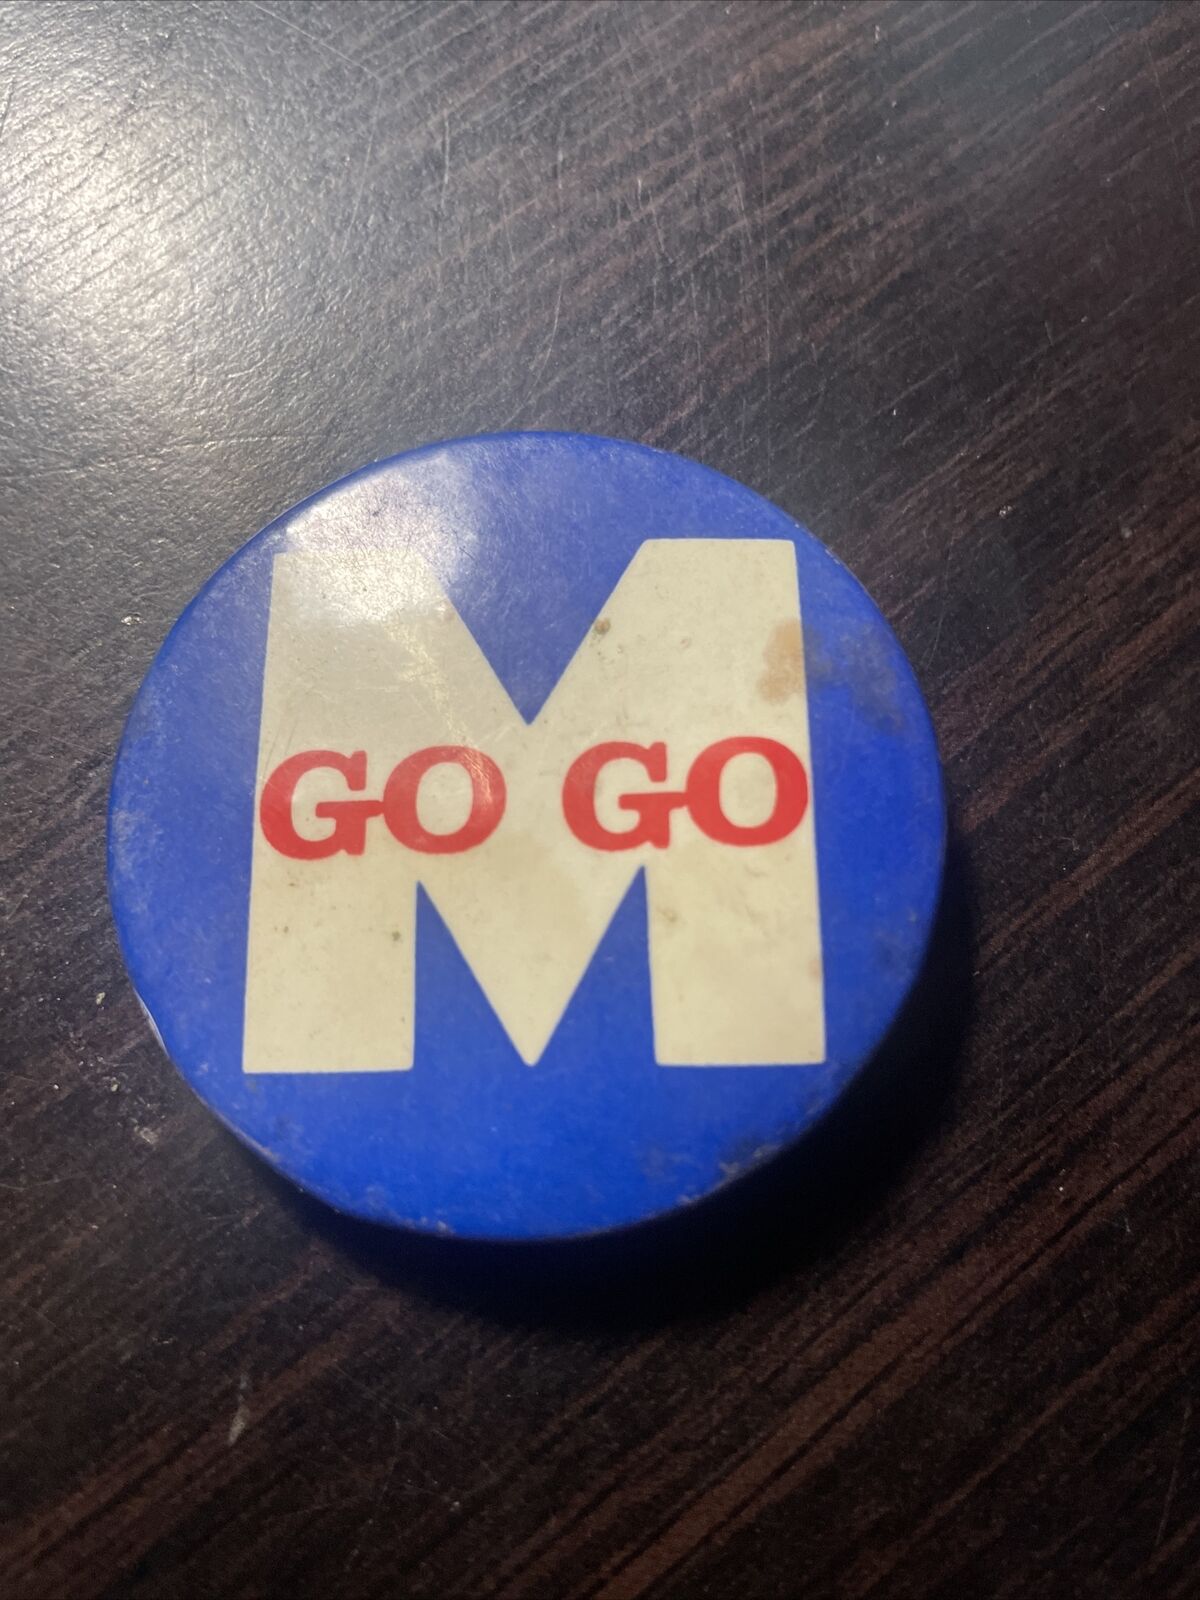 GO GO M VINTAGE PINBACK PIN BACK BLUE FIELD LARGE WHITE M & GO GO IN RED 